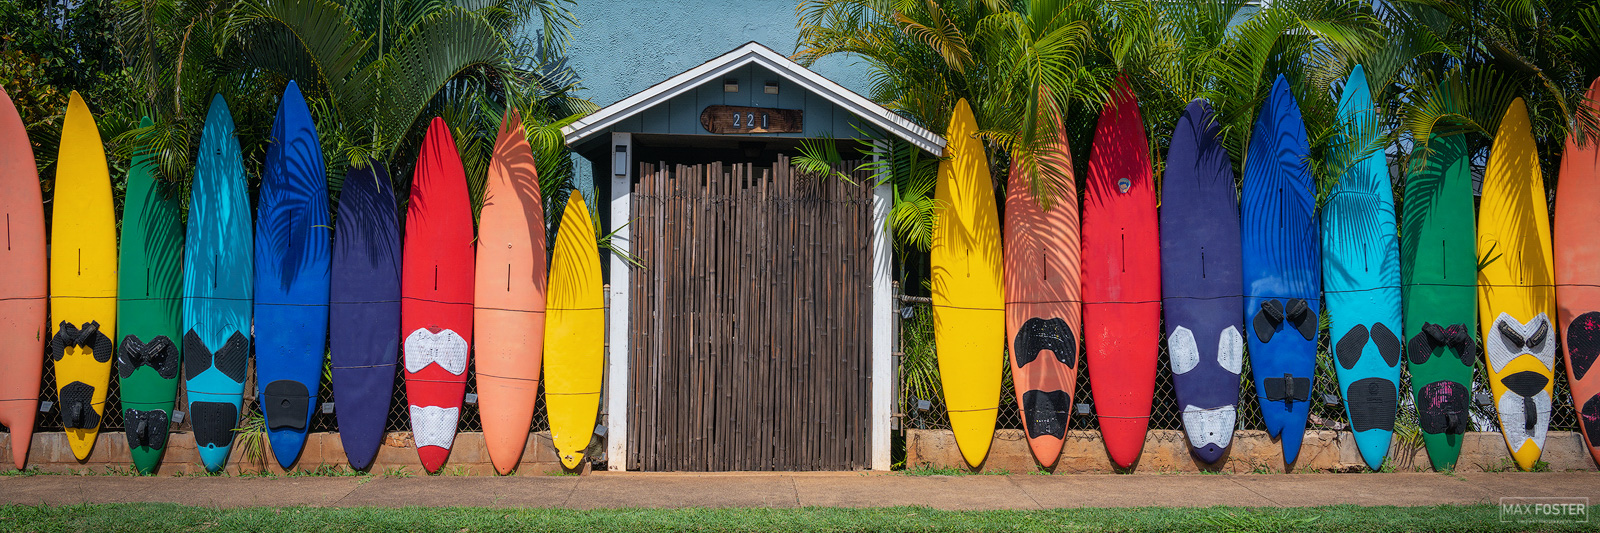 Breathe new life into your home with Surf's Up, Max Foster's limited edition photography print of a surfboard fence in Maui from...